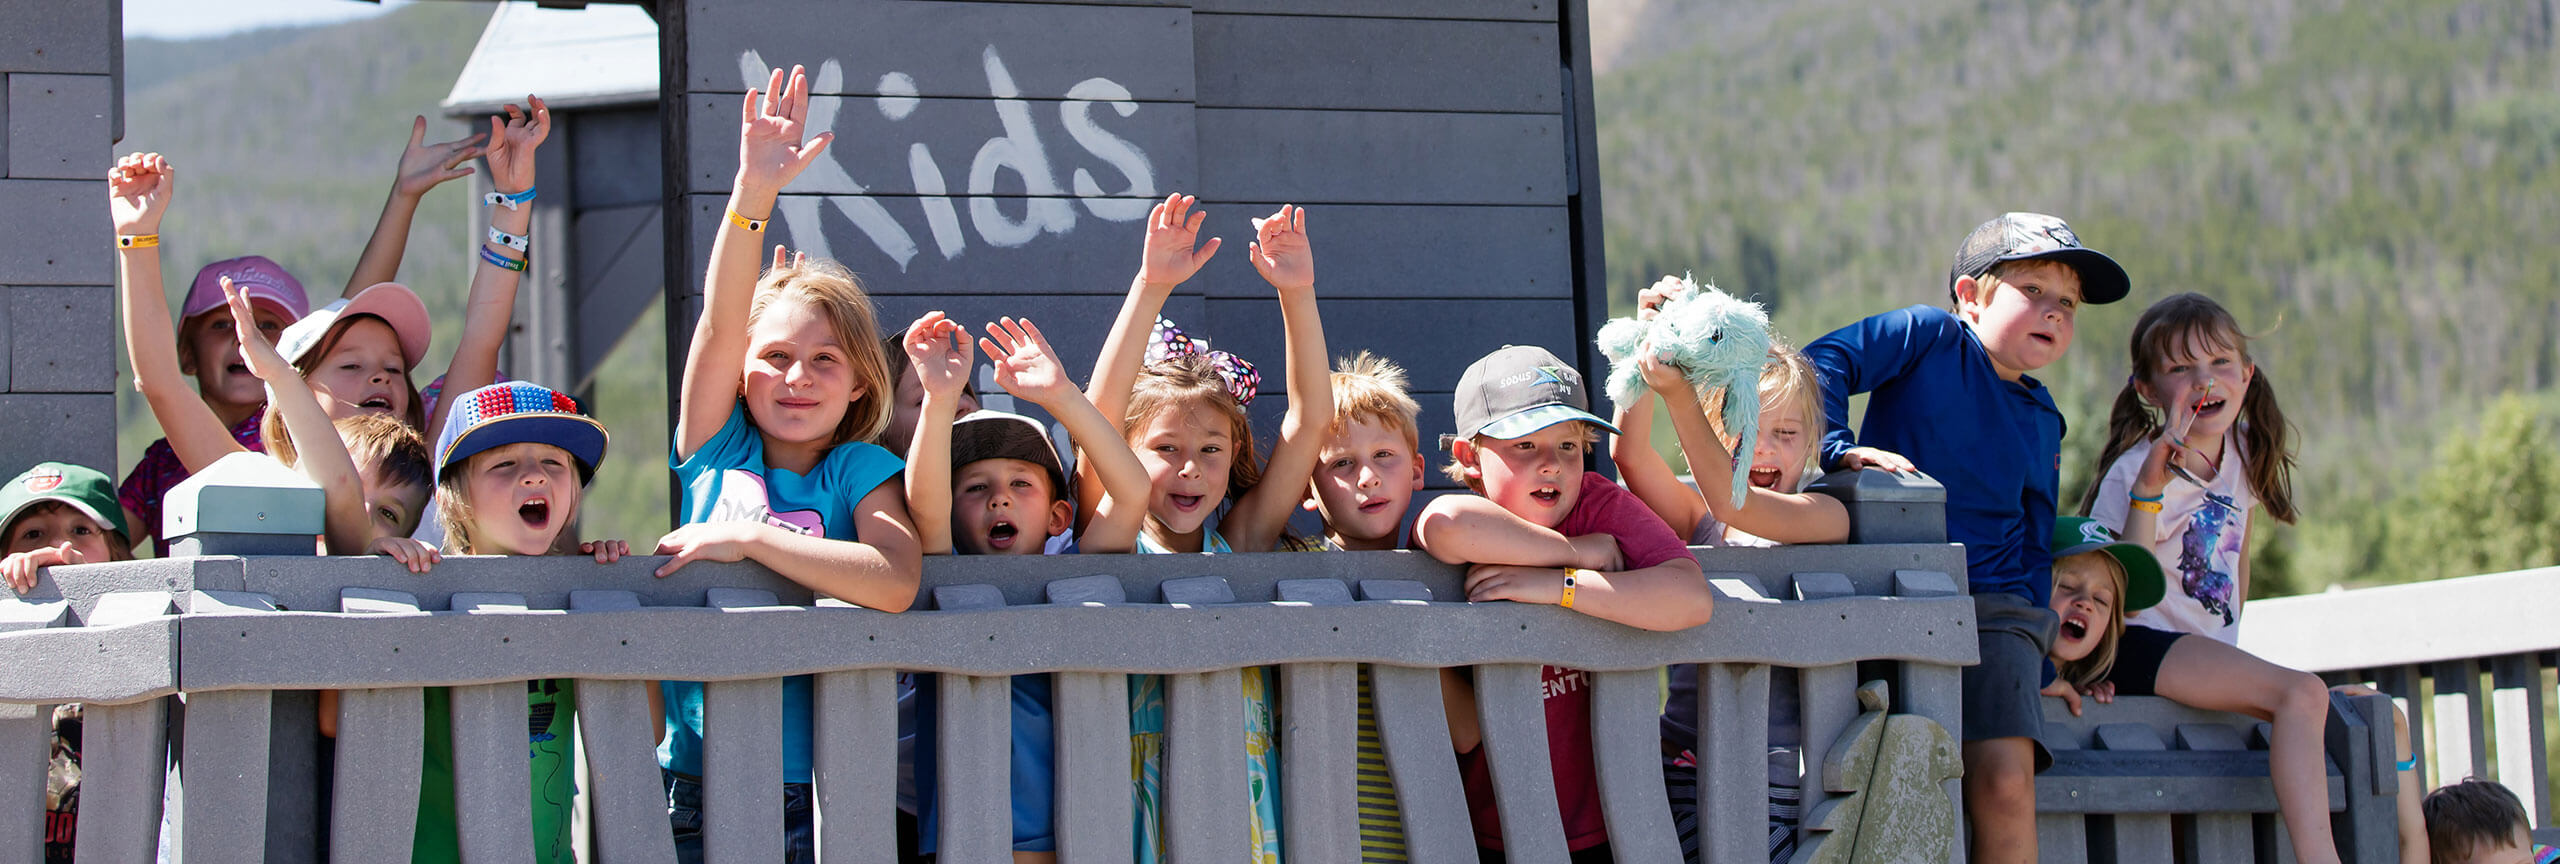 Group of kids posing on a deck.